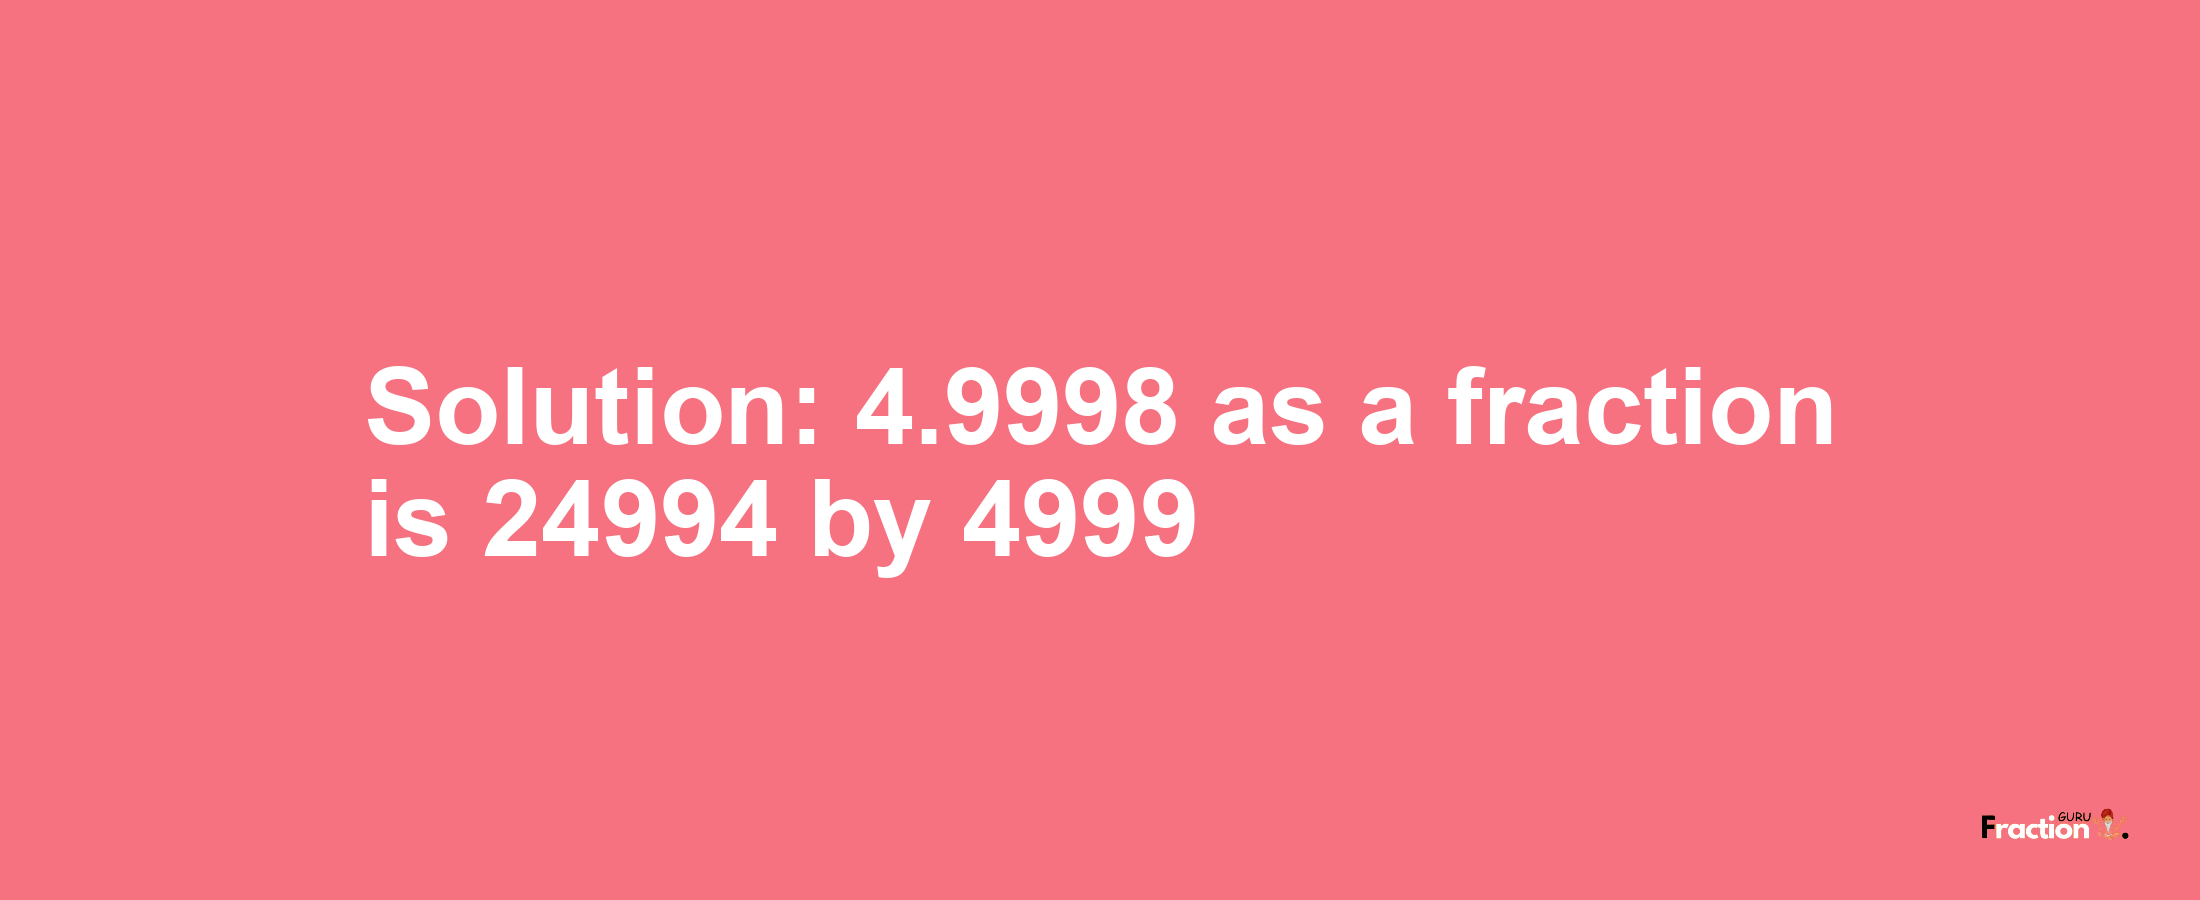 Solution:4.9998 as a fraction is 24994/4999